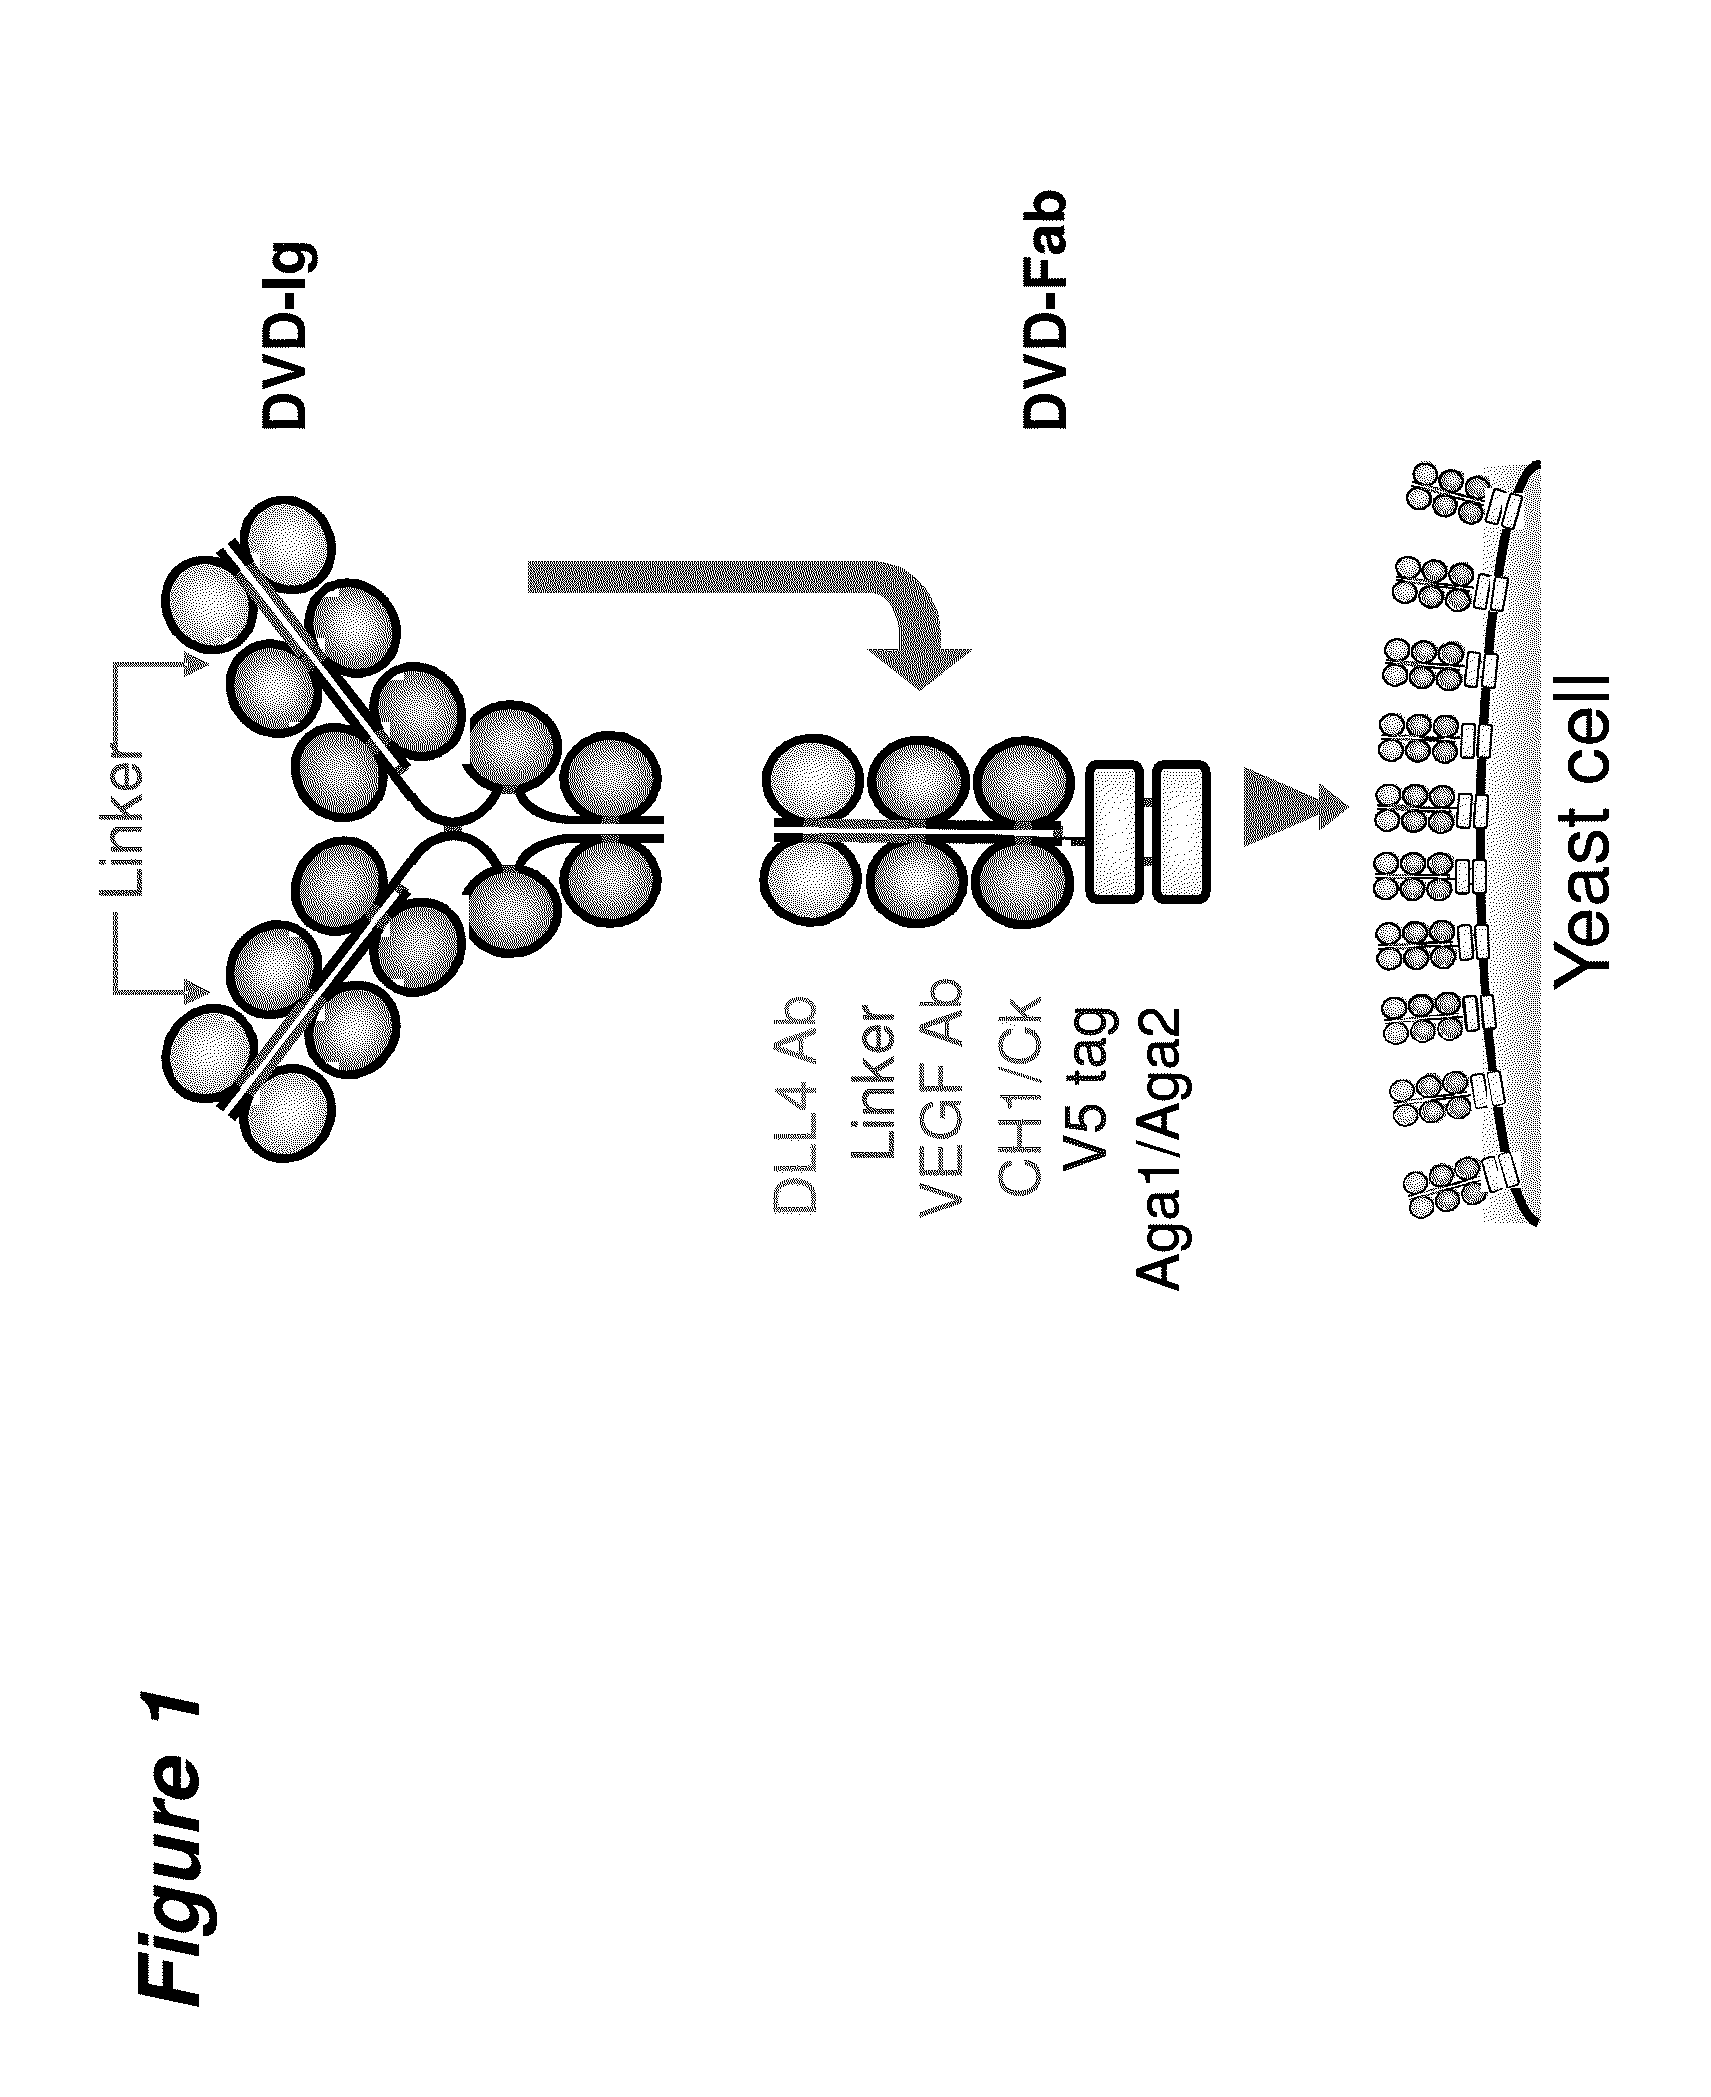 Multivalent binding protein compositions and methods for identifying variants of same